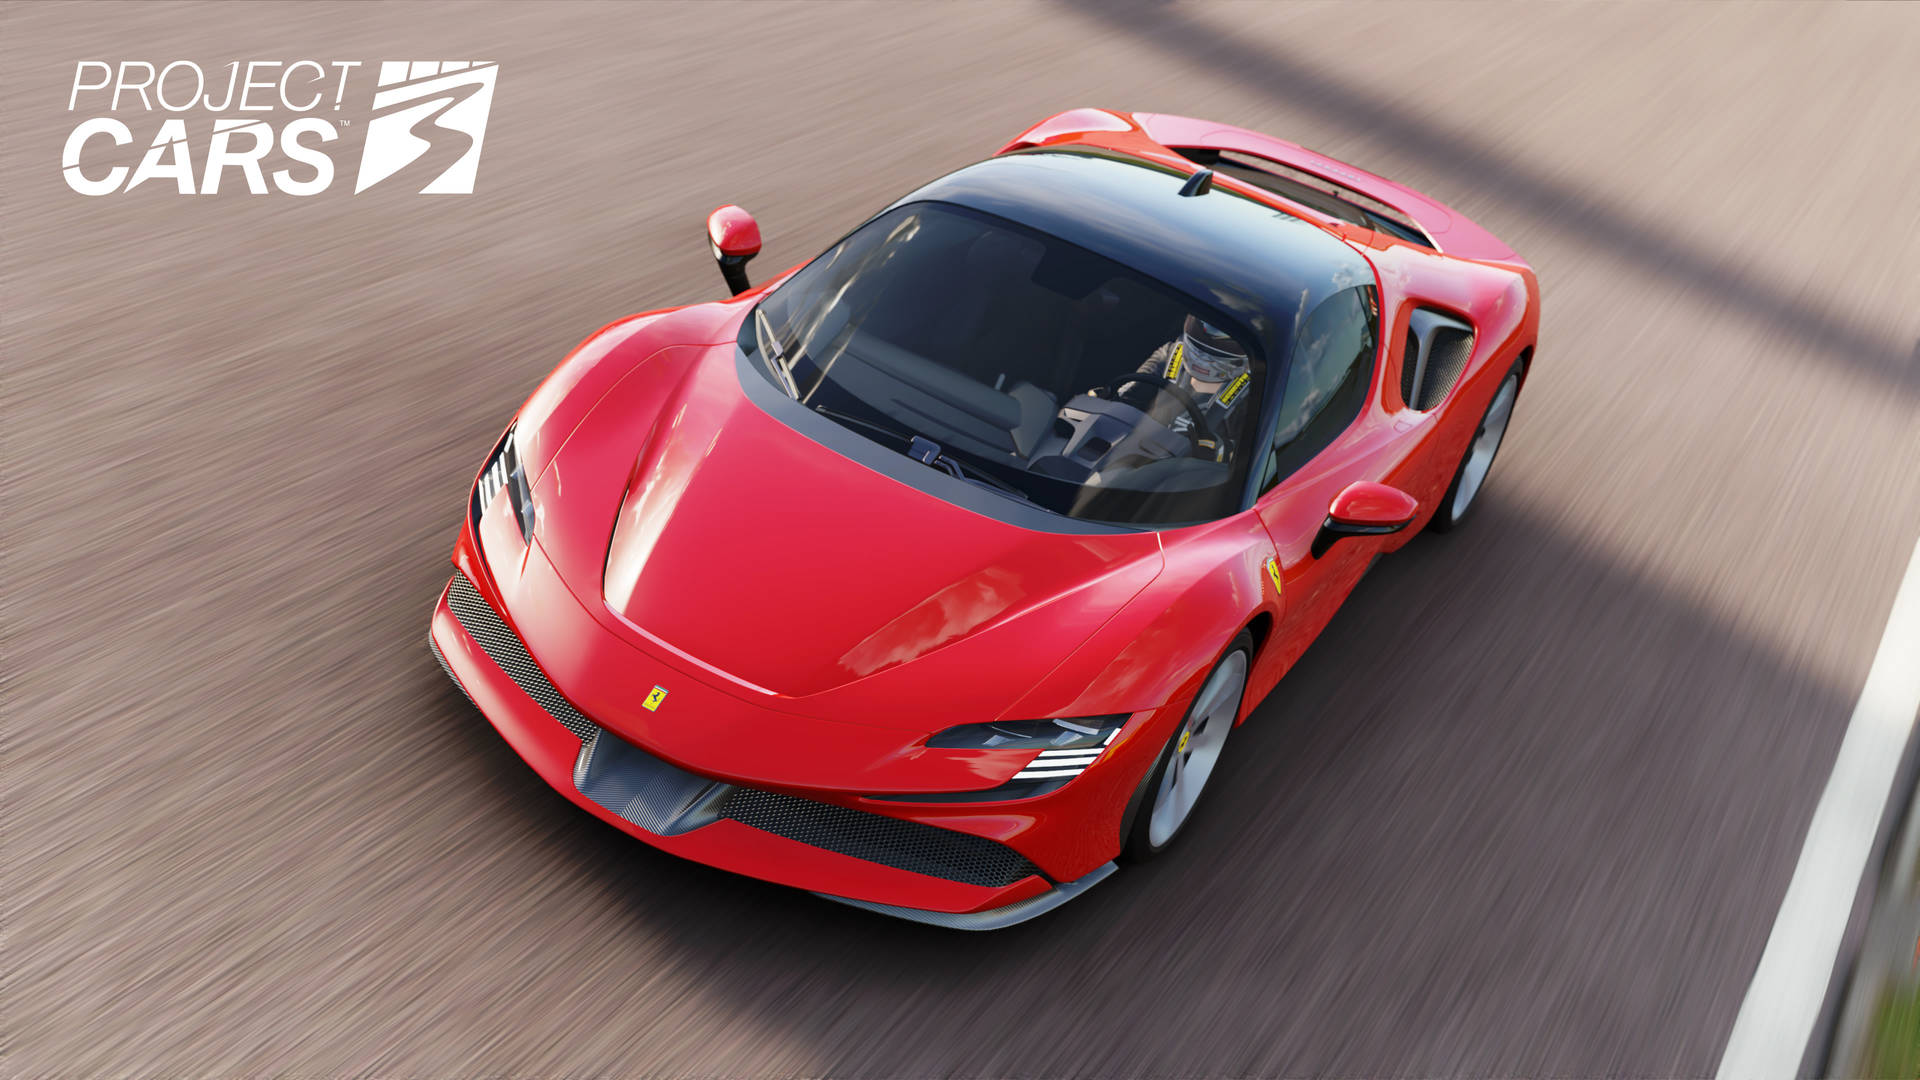 Red Ferrari Project Cars 3 Background